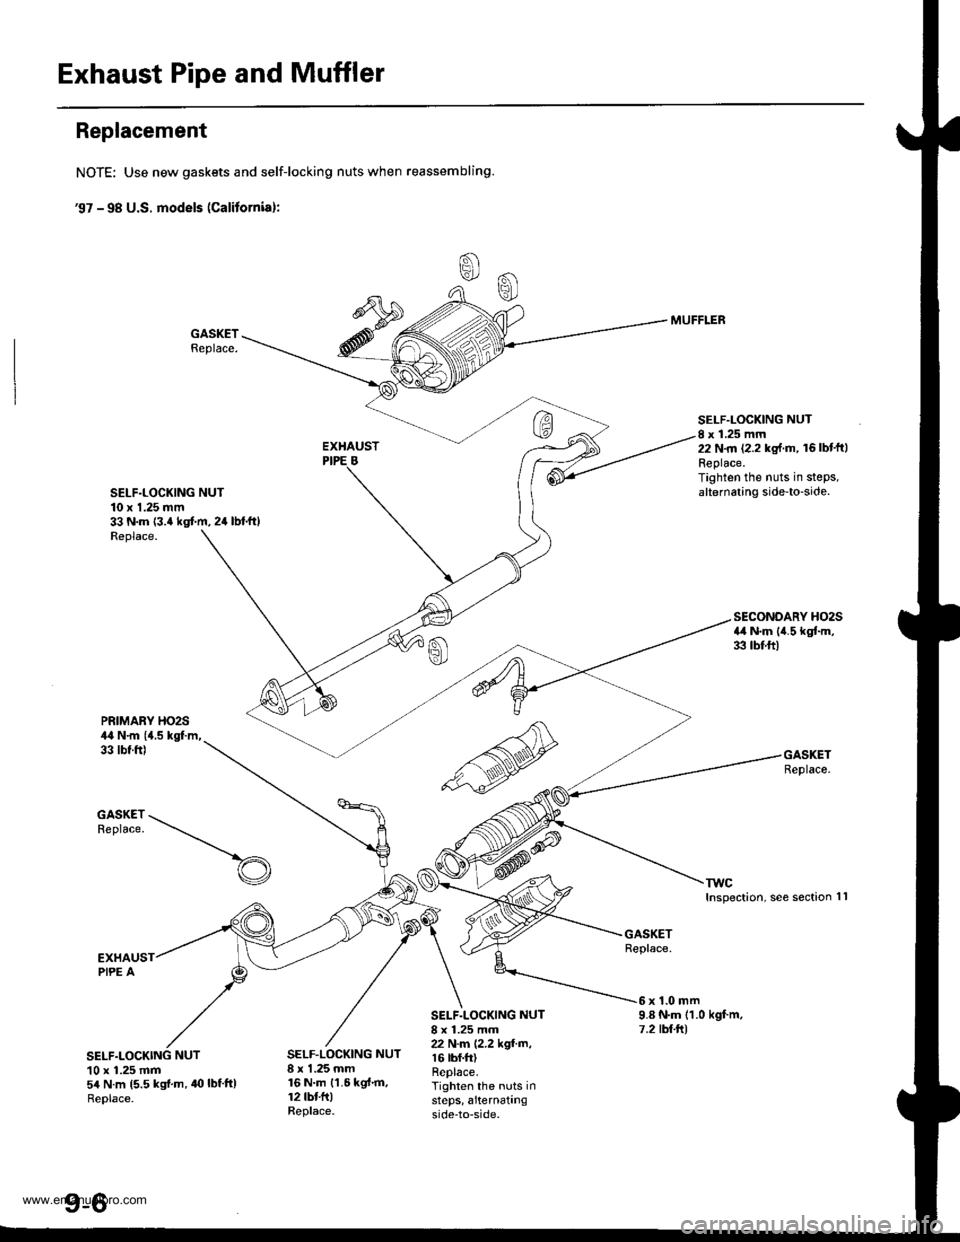 HONDA CR-V 2000 RD1-RD3 / 1.G Workshop Manual 
Exhaust Pipe and Muffler
Replacement
NOTE: Use new gaskets and self-locking nuts when reassembling.
€7 - 98 U.S. models (Calitornial:
GASKETReplace.
SELF.LOCKING NUT10 x 1.25 mm33 N.m {3.4 kgt m, 2